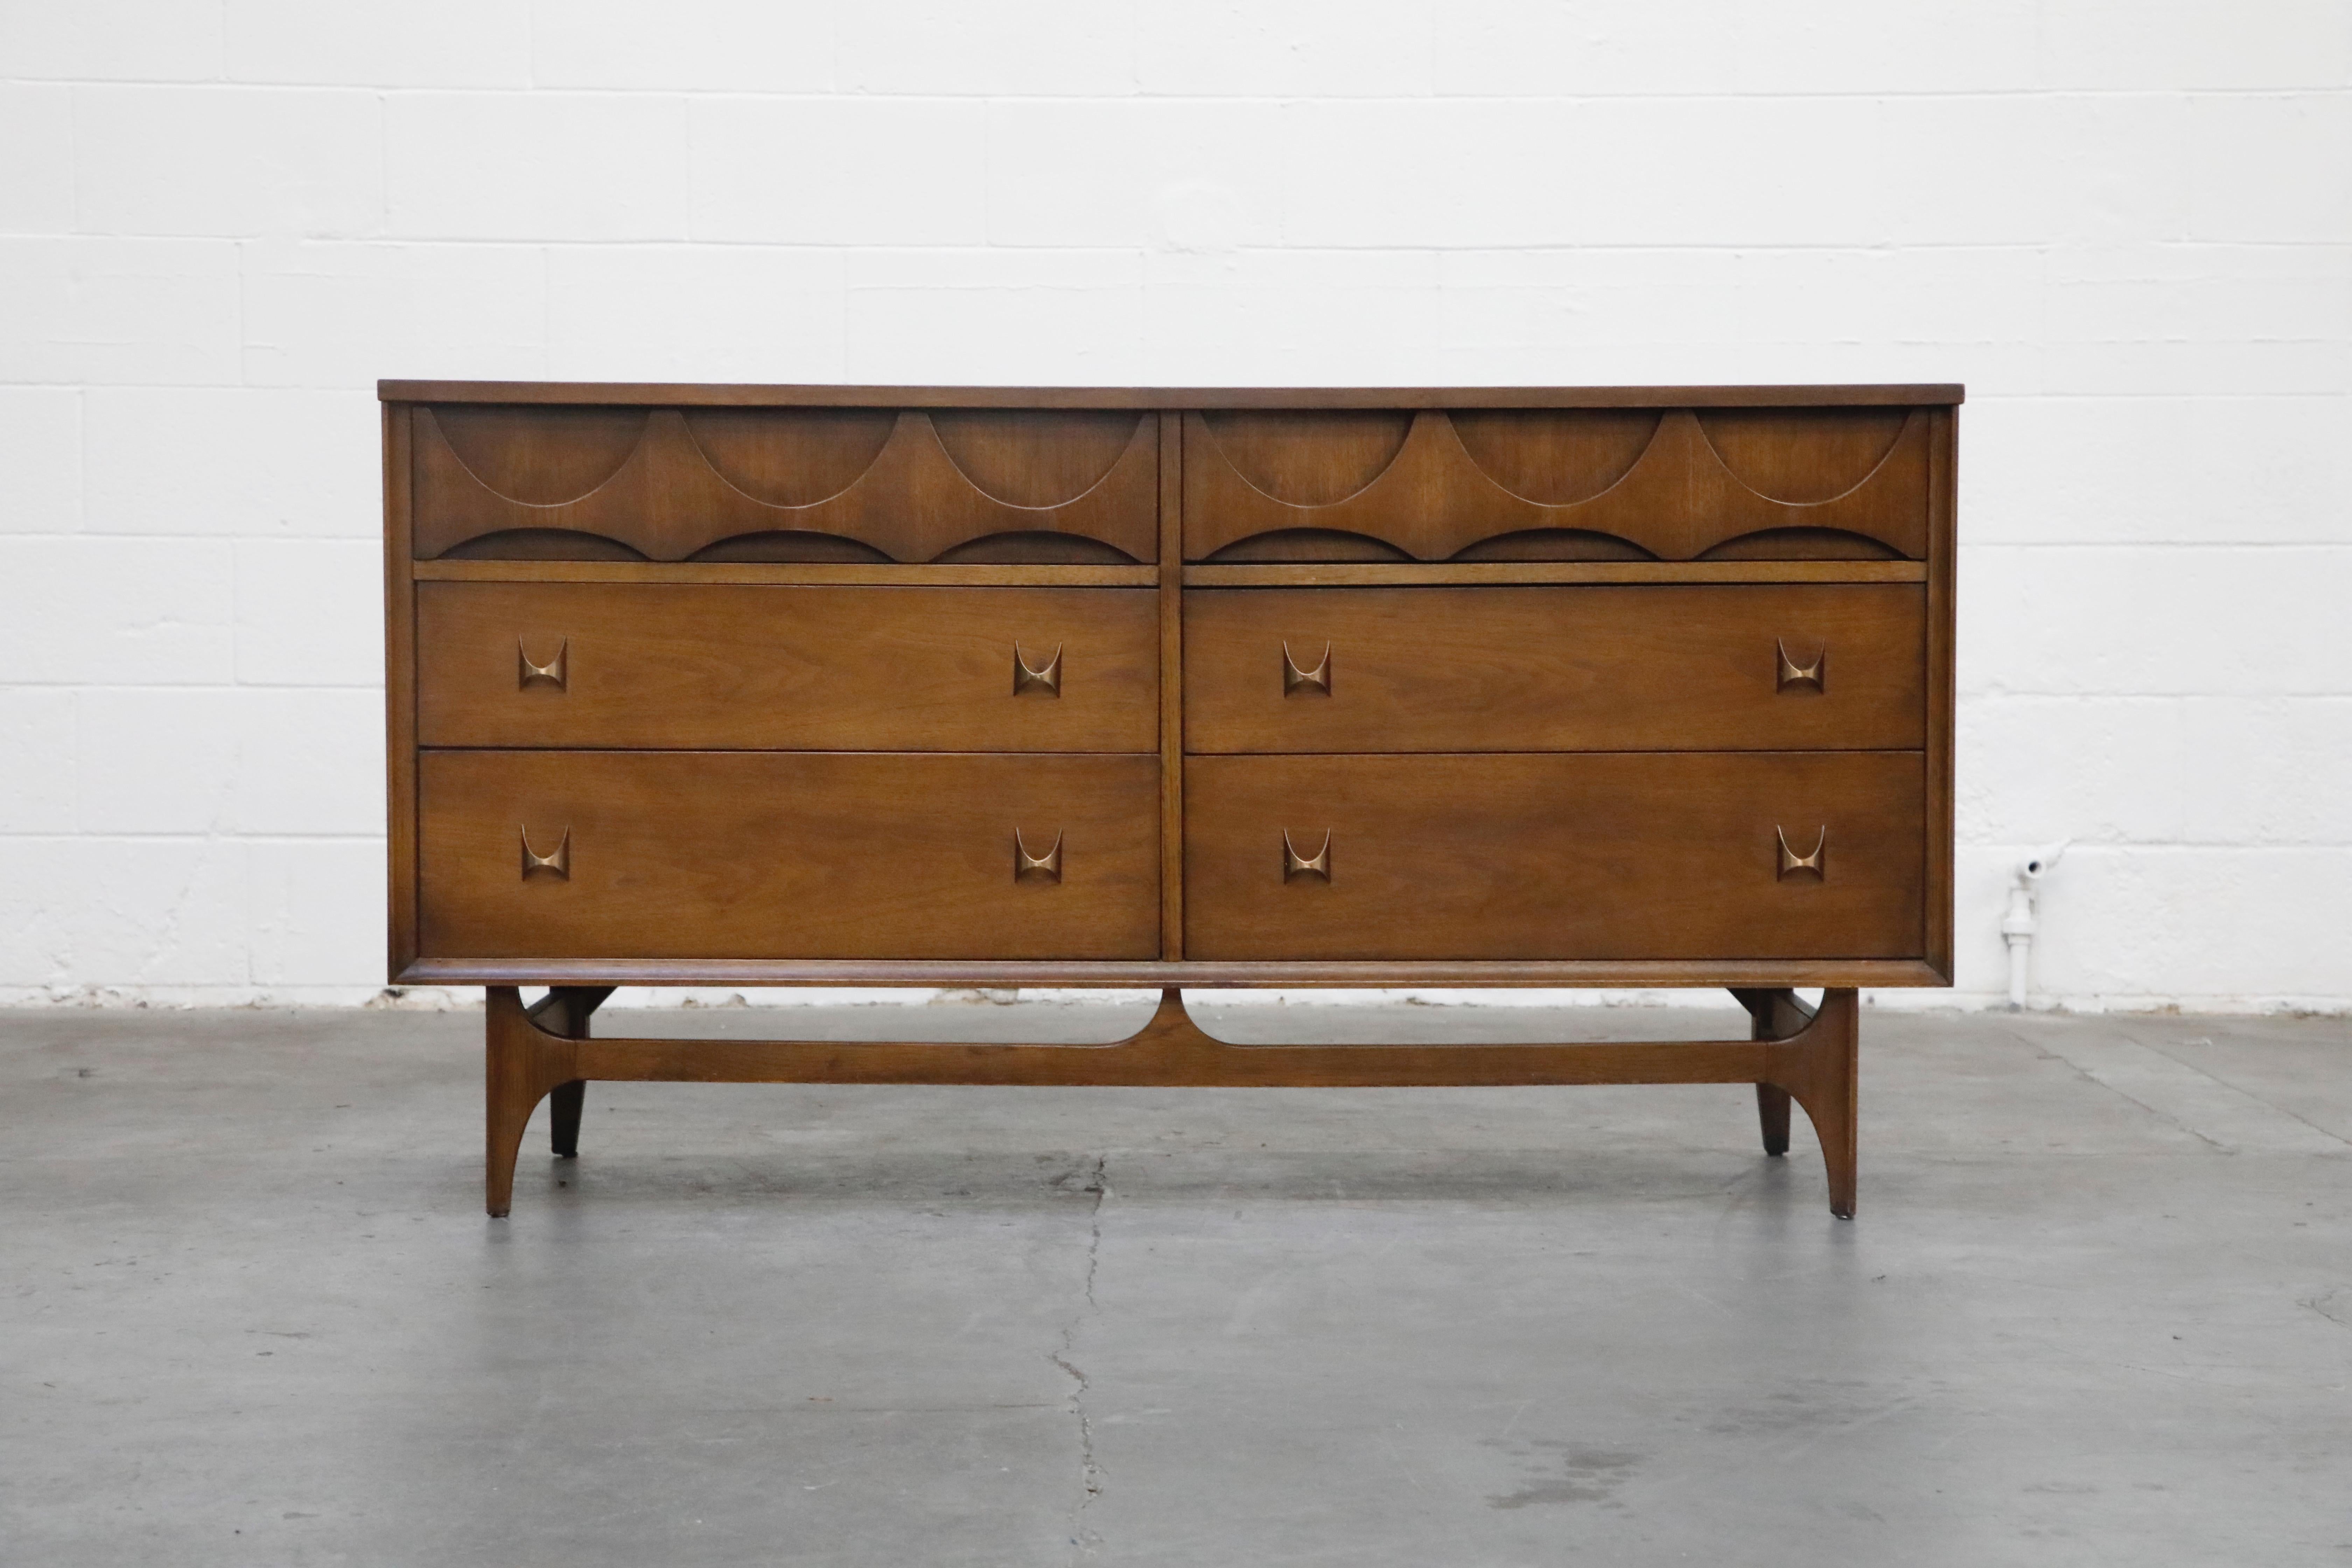 Attention Brasilia collectors... here is a gorgeous 'Brasilia' dresser in its original finish and in excellent vintage condition and is signed with its original Brasilia label. This beautiful dresser features the signature Brasilia sculpted front